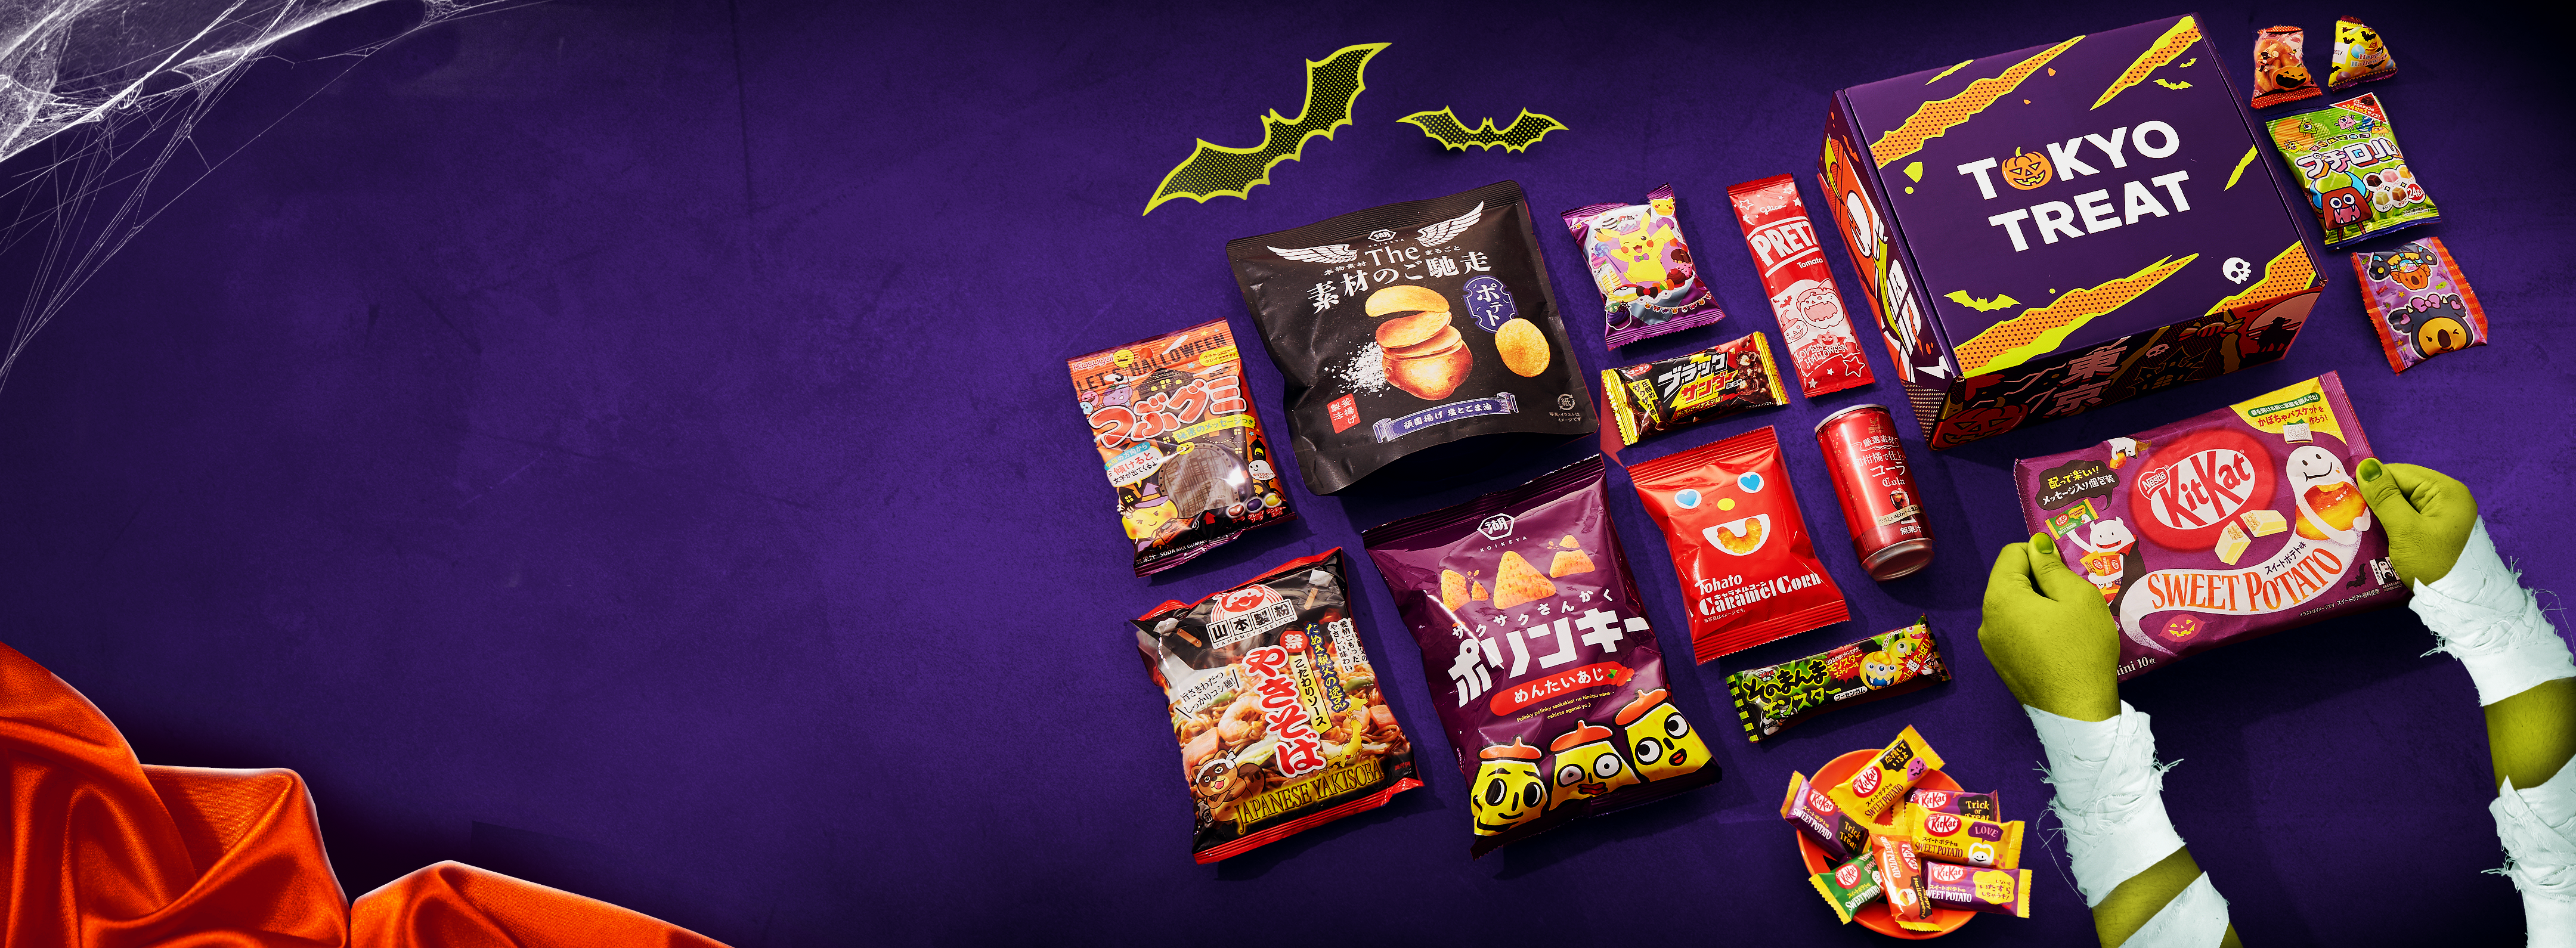 The special Halloween TokyoTreat box sits against a dark purple backrop, surrounded by Halloween motifs.